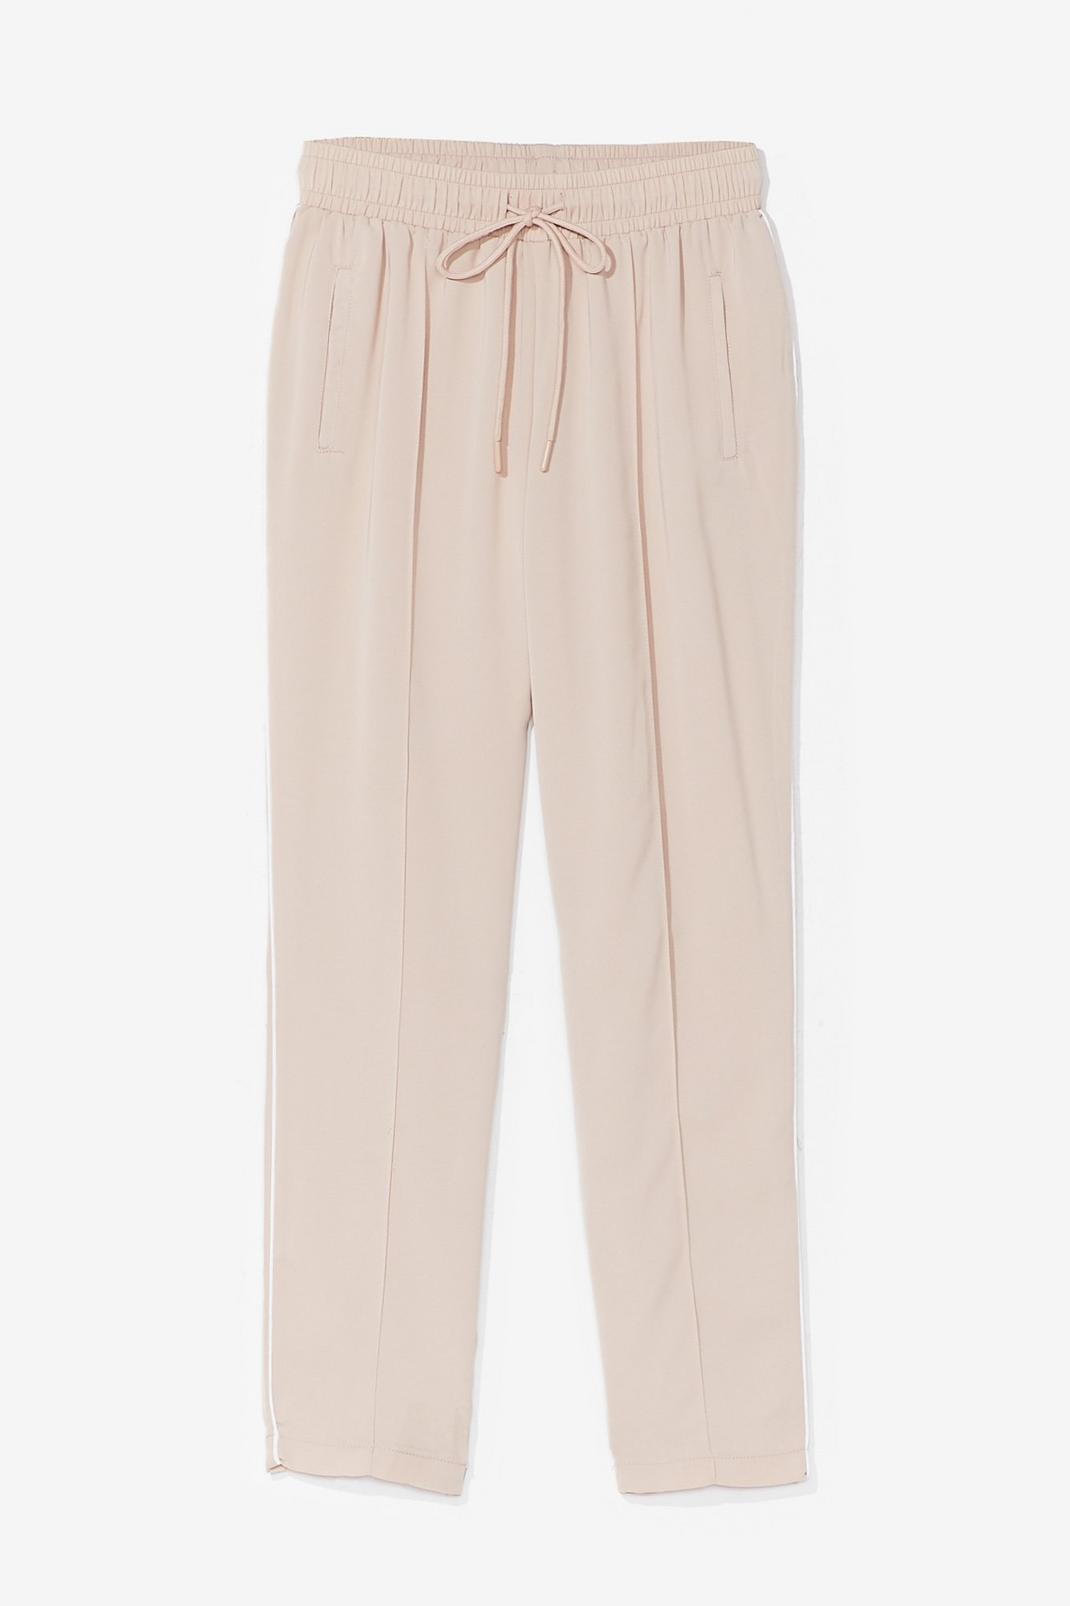 Beige Maybe Tomorrow High-Waisted Sweatpants Pants image number 1